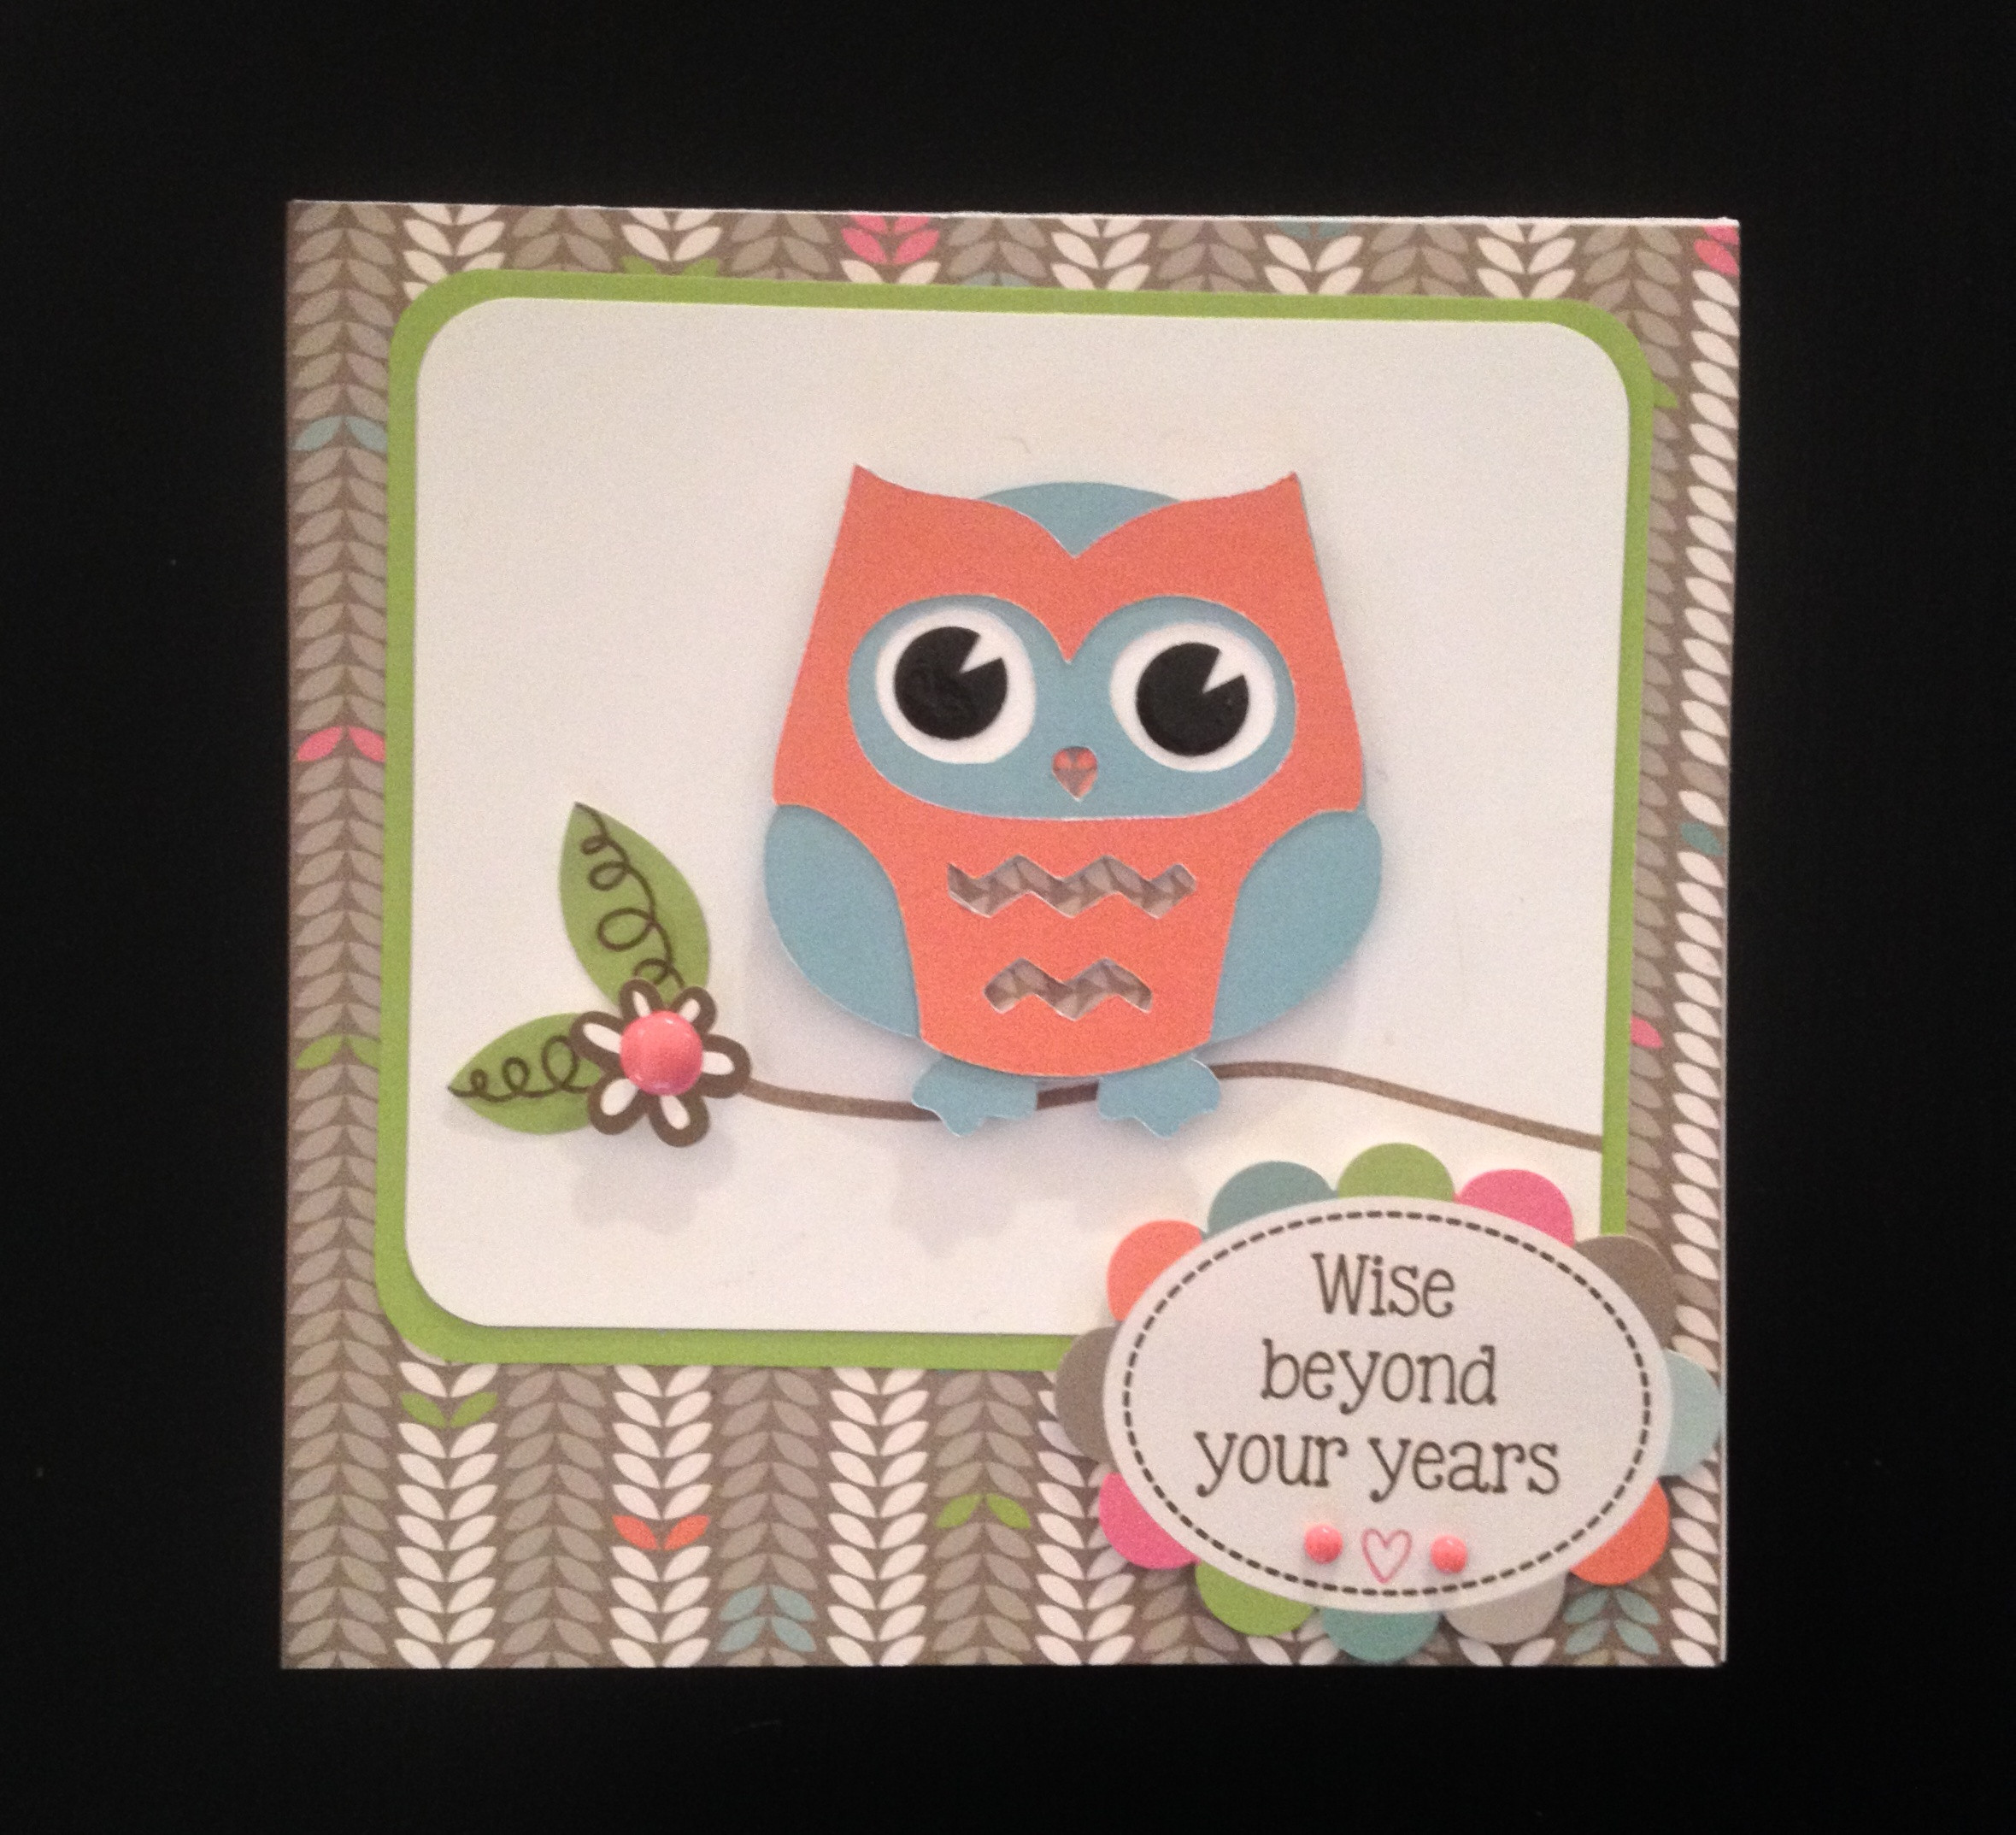 Owl Birthday Card
 “Wise Beyond Your Years” Owl Birthday Card